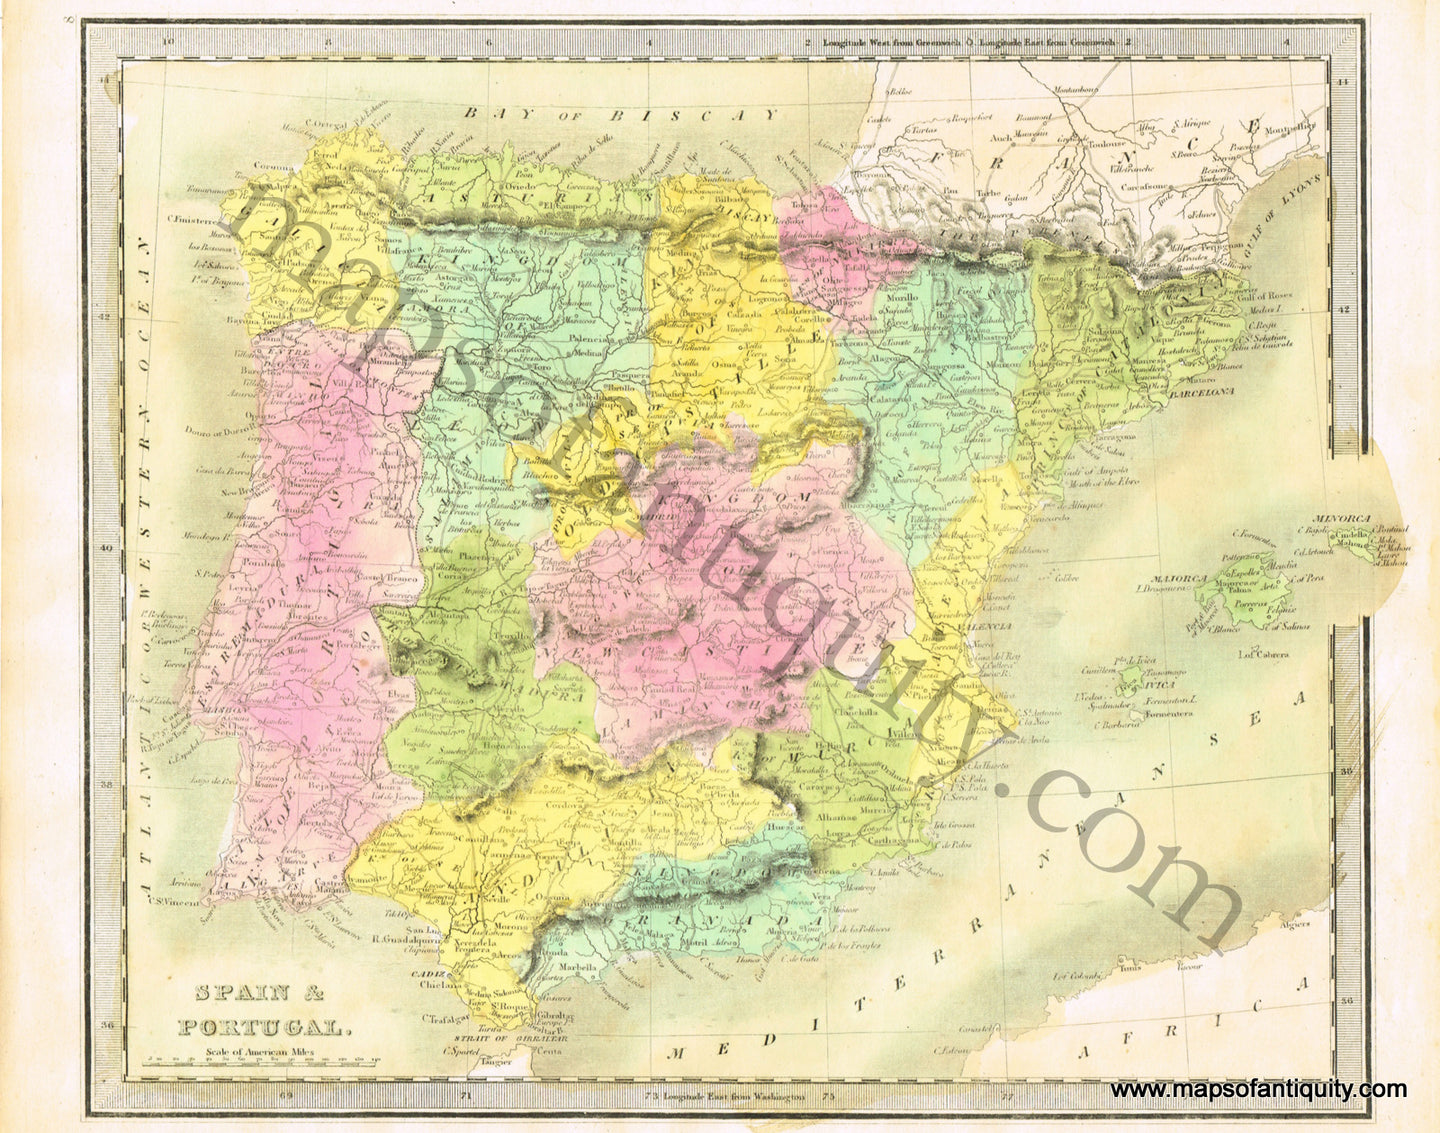 Antique-Hand-Colored-Map-Spain-&-Portugal.-Europe-Spain-and-Portugal-1842-Jeremiah-Greenleaf-Maps-Of-Antiquity